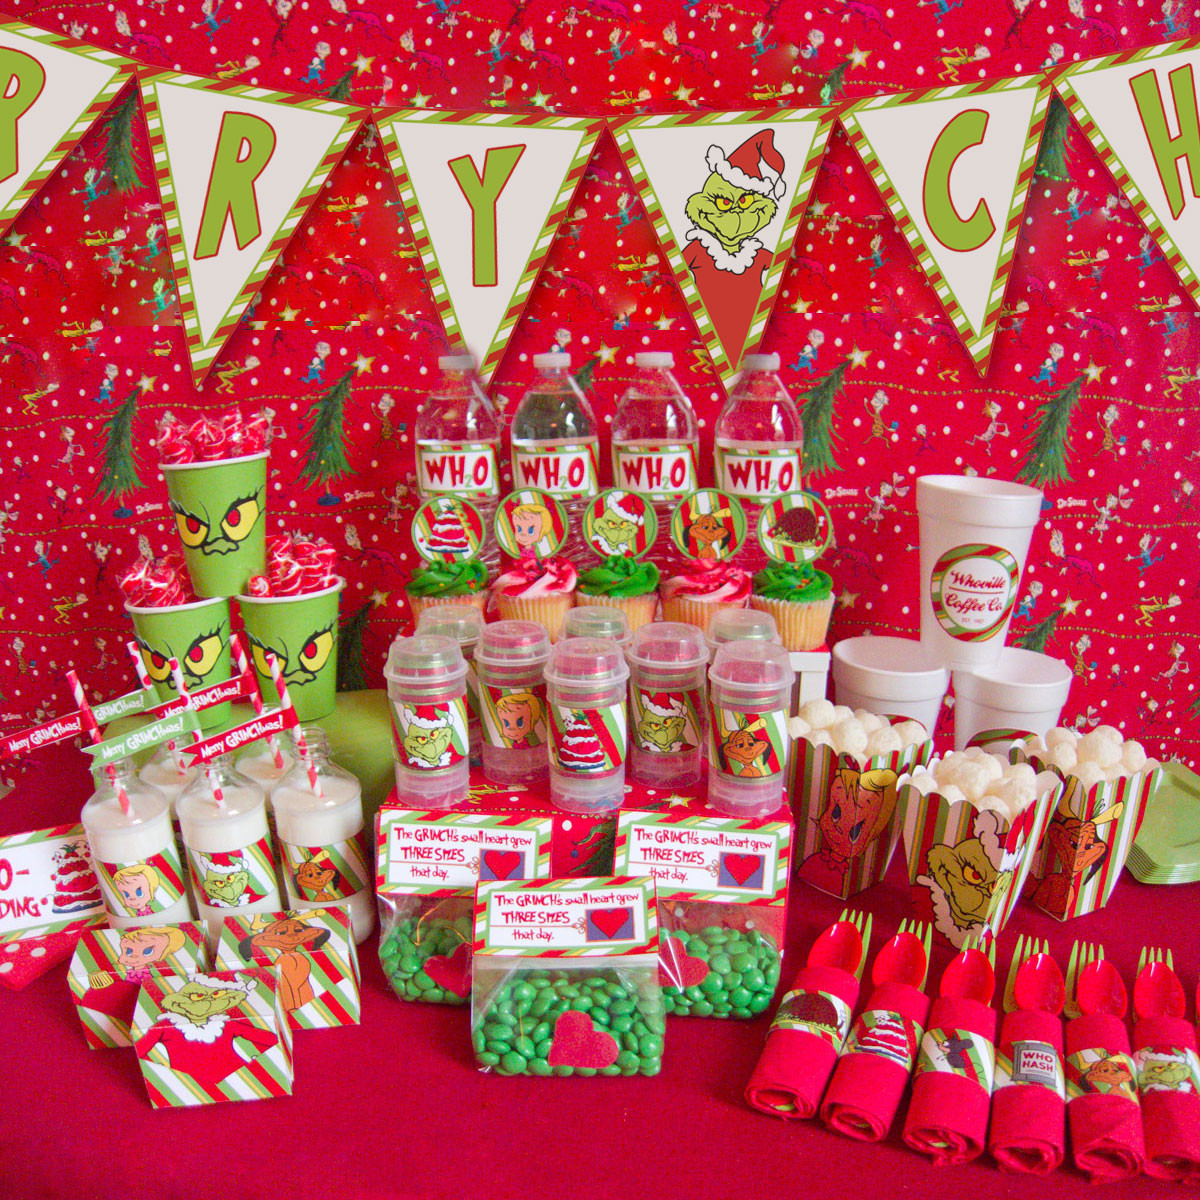 Grinch Christmas Party Ideas
 Grinch Christmas party ideas